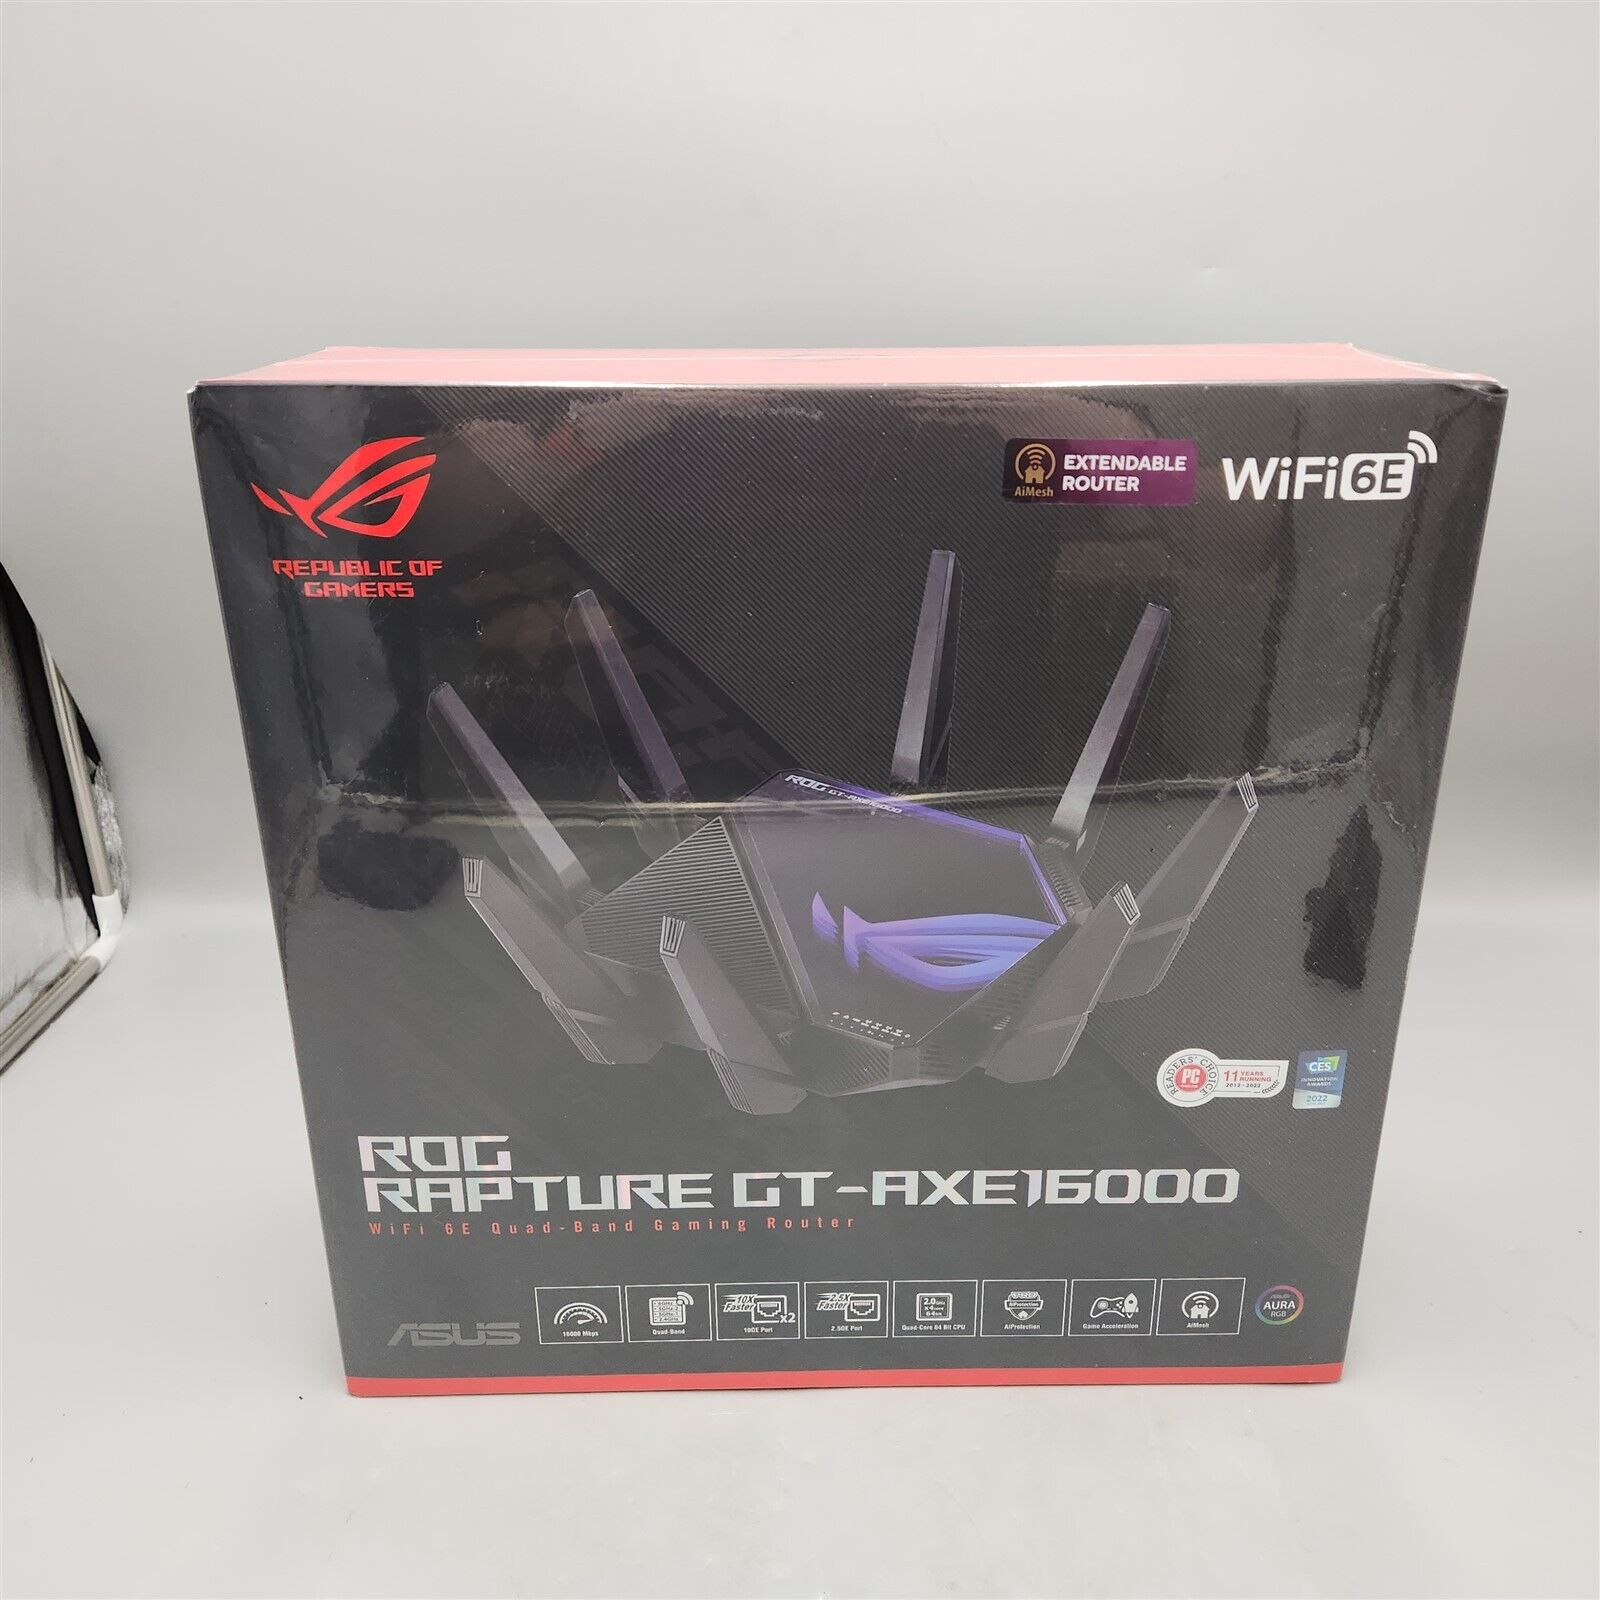 -NEW- ASUS ROG Rapture WiFi 6E Gaming Router (GT-AXE16000) - Quad-Band